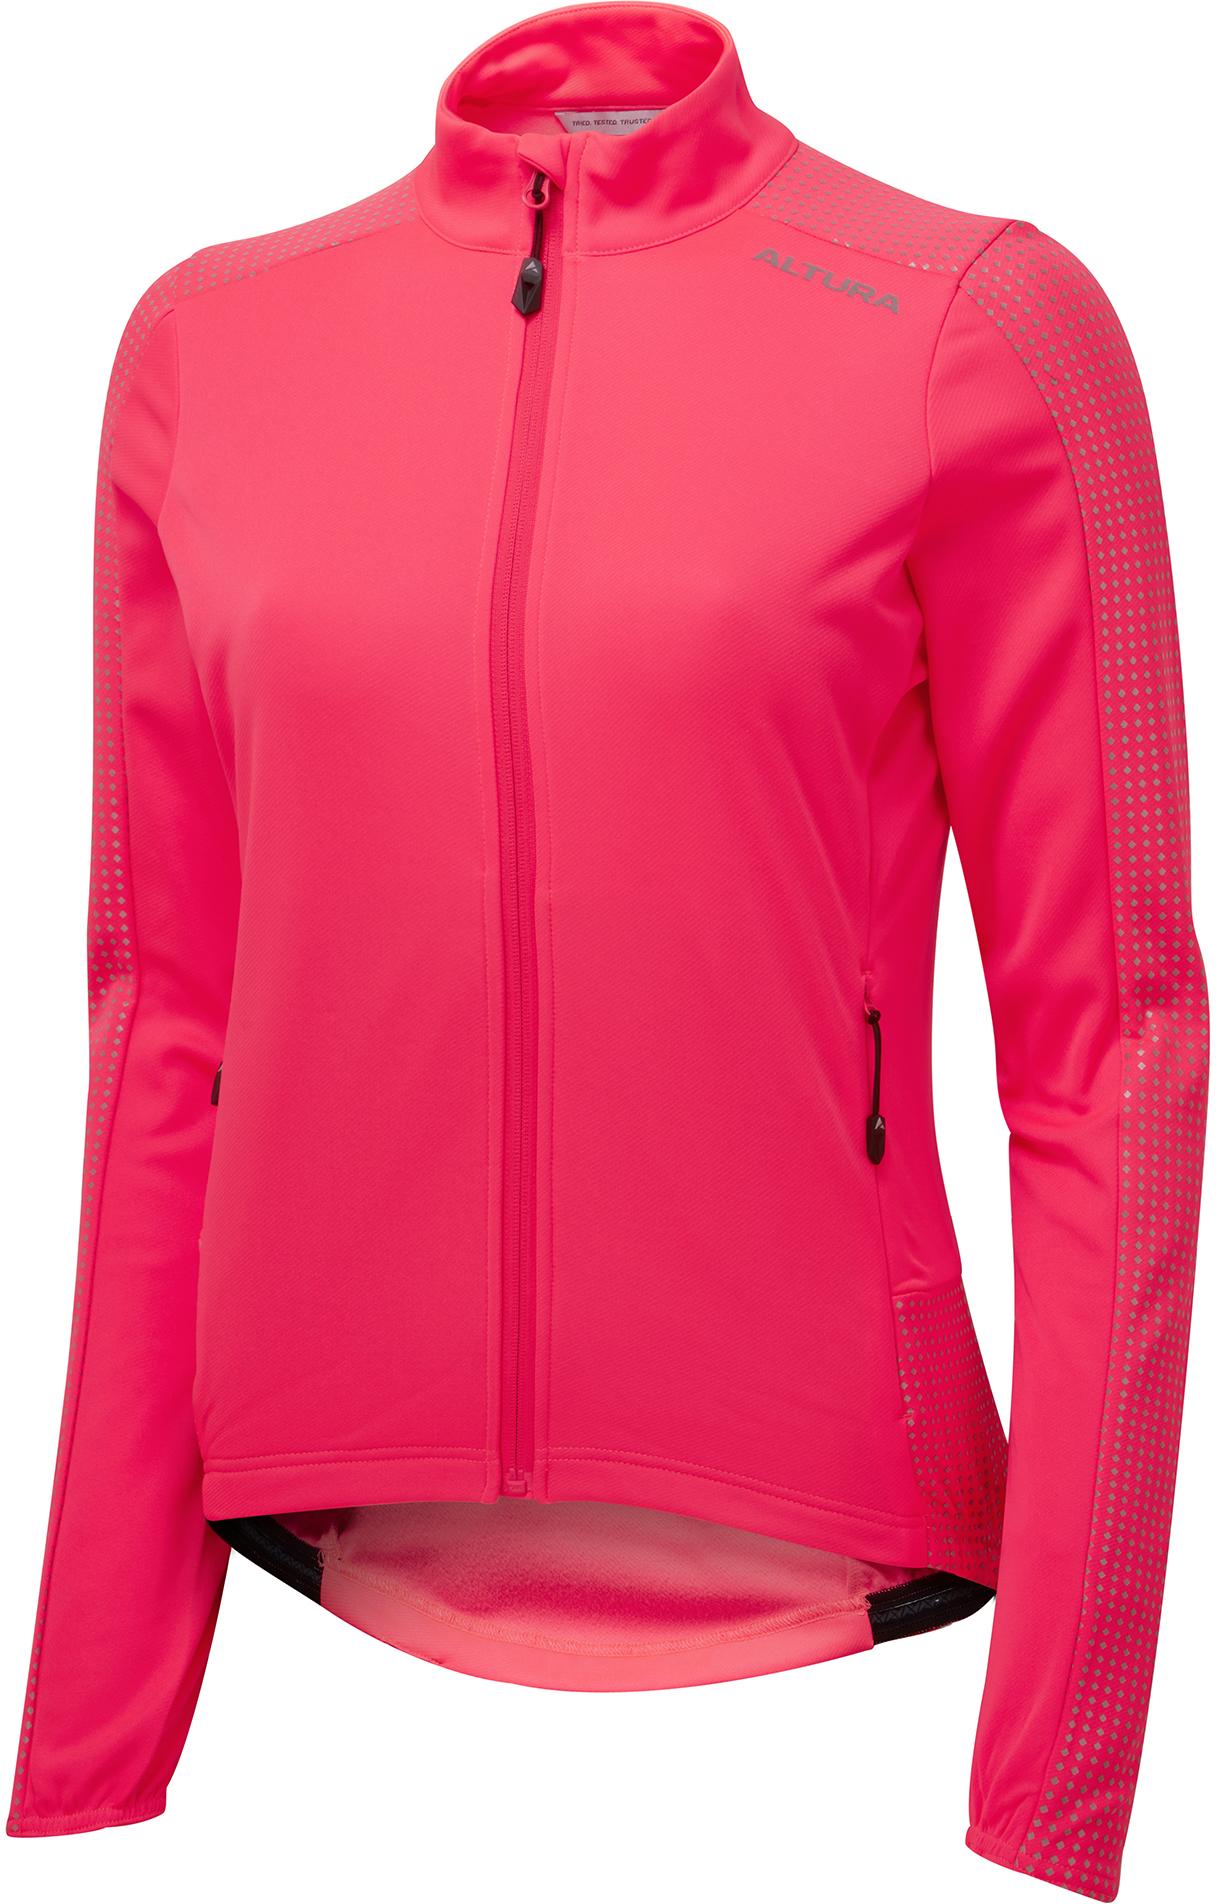 Altura Nightvision Women's Long Sleeve Jersey Pink 18